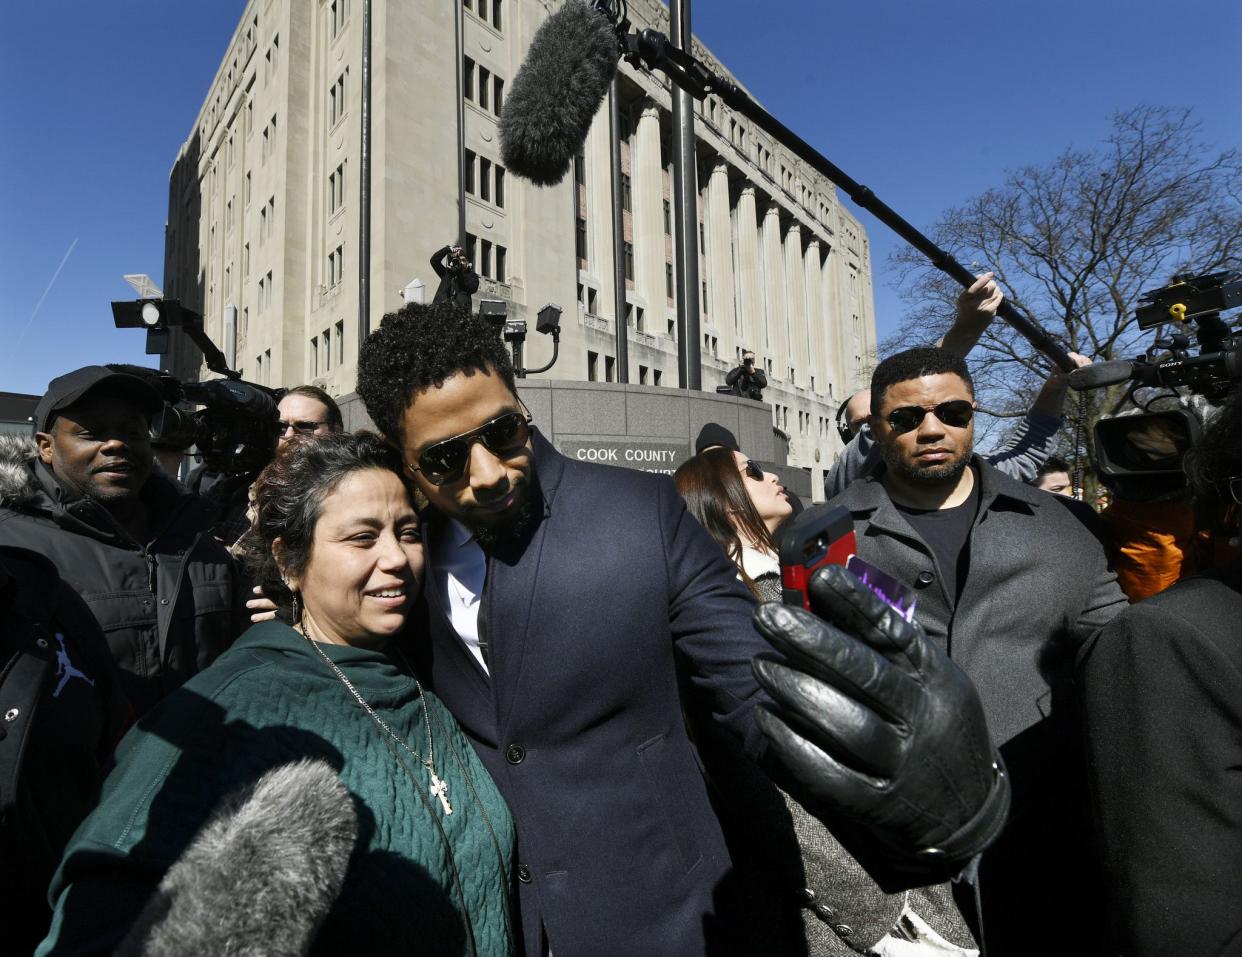 Actor Jussie Smollett takes a selfie with a fan while leaving Cook County Court after his charges were dropped Tuesday, March 26, 2019, in Chicago. Smollett was indicted on 16 felony counts related to making a false report that he was attacked by two men who shouted racial and homophobic slurs.